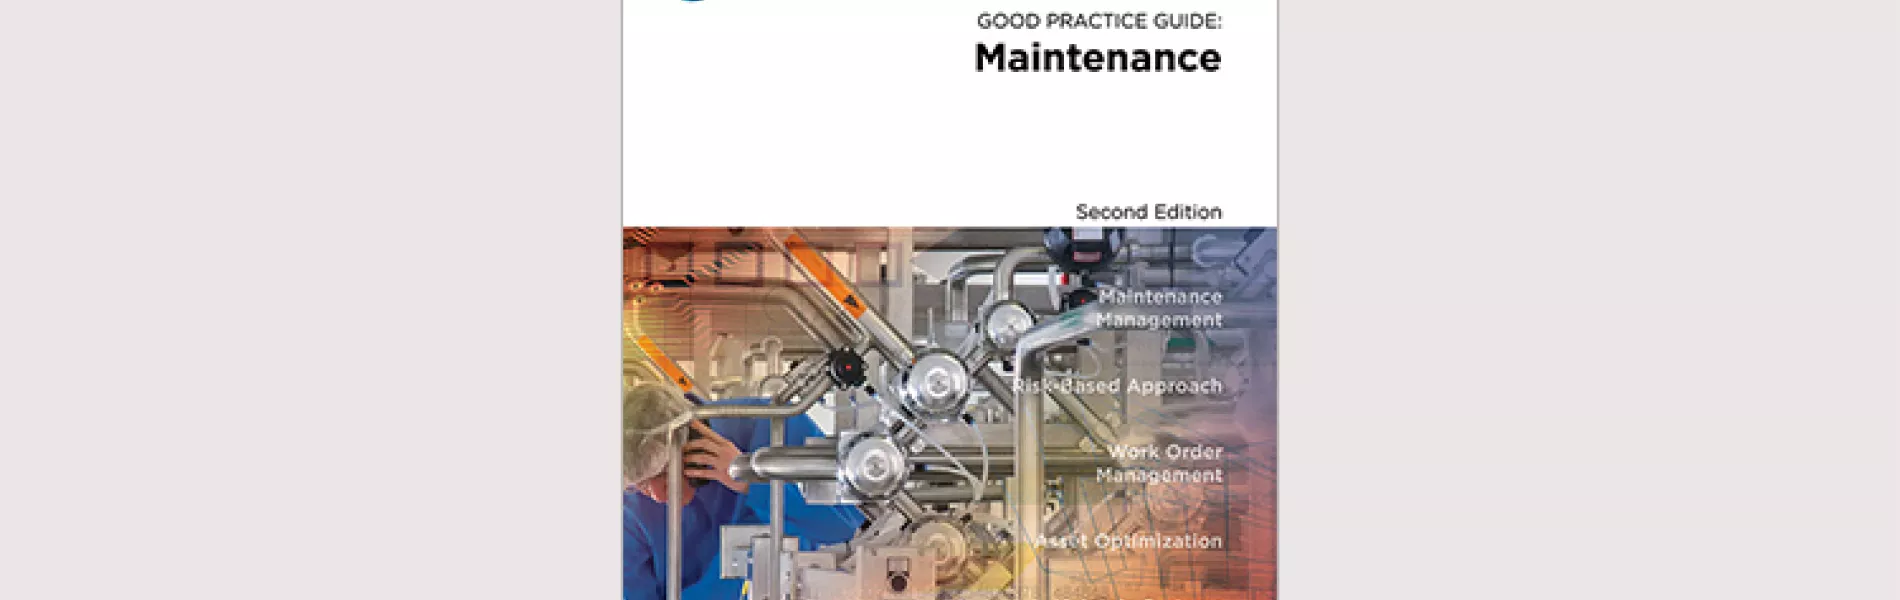 ISPE Briefs: New Edition of Good Practice Guide on Maintenance Is Available